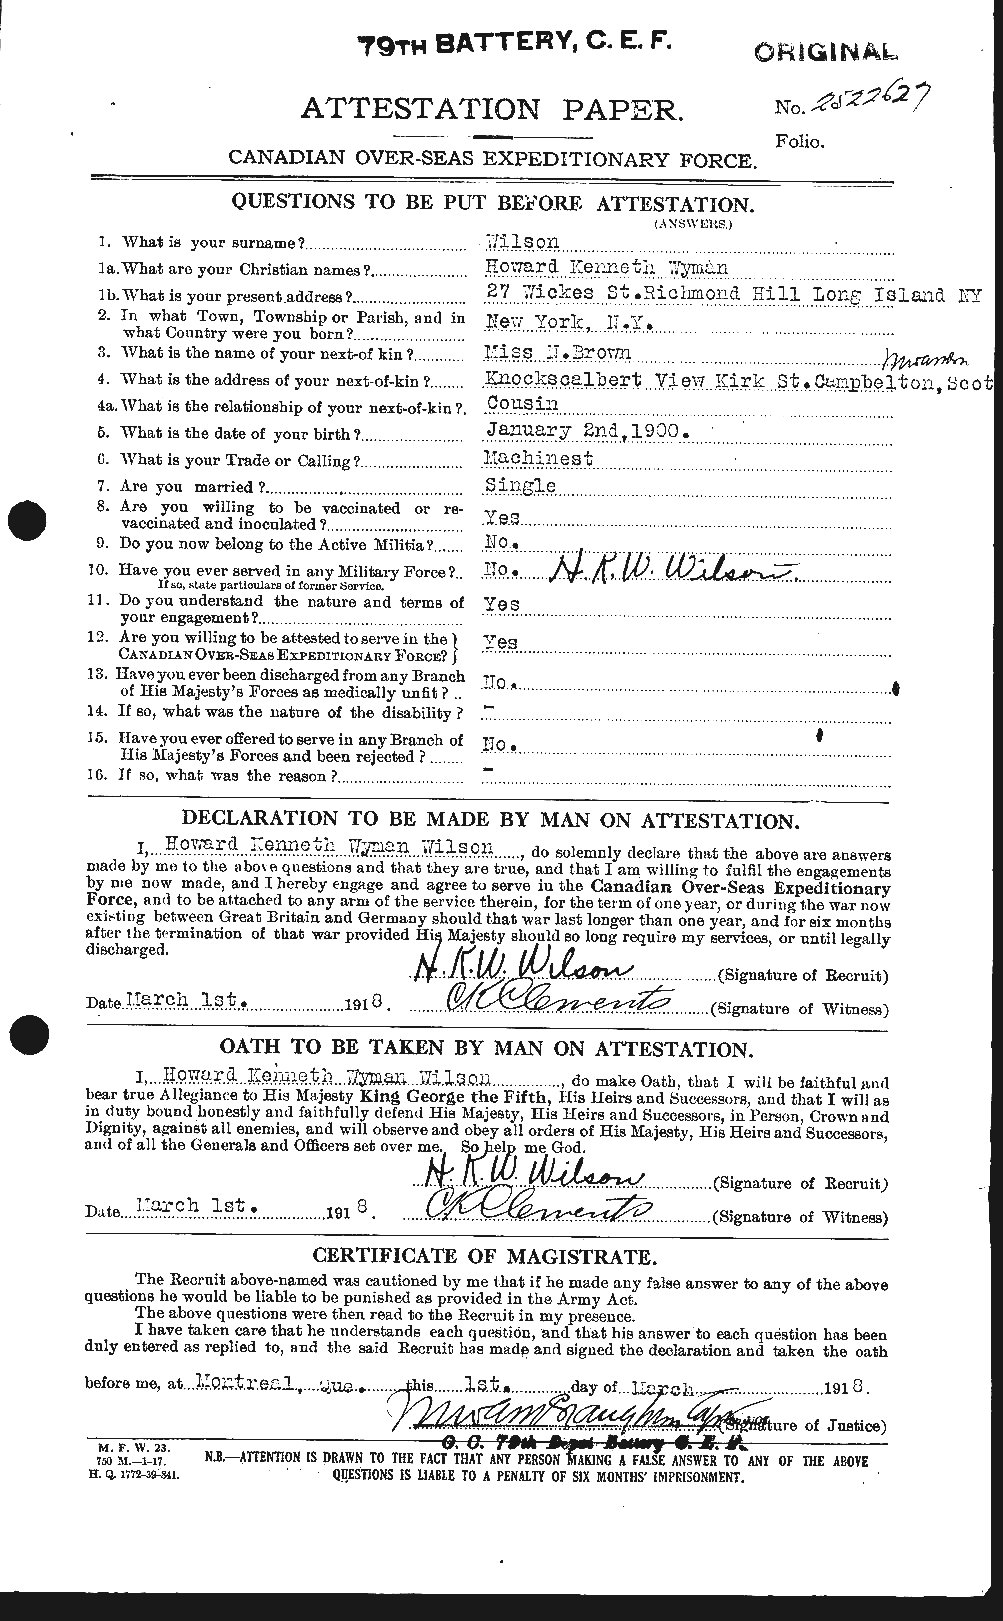 Personnel Records of the First World War - CEF 679594a